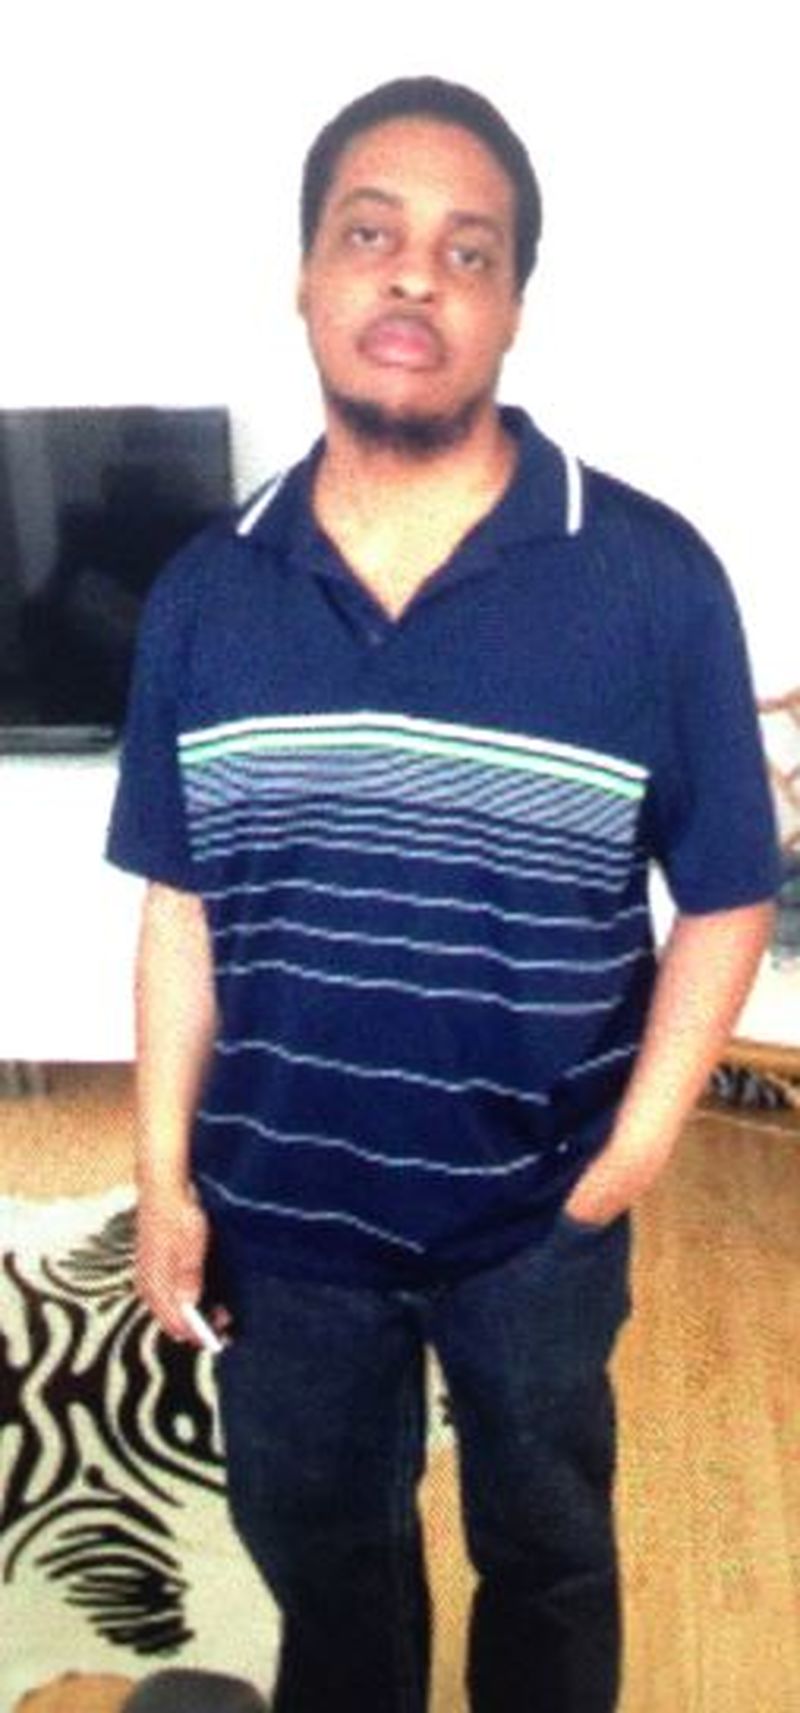 toronto police search for missing man sheldon smith